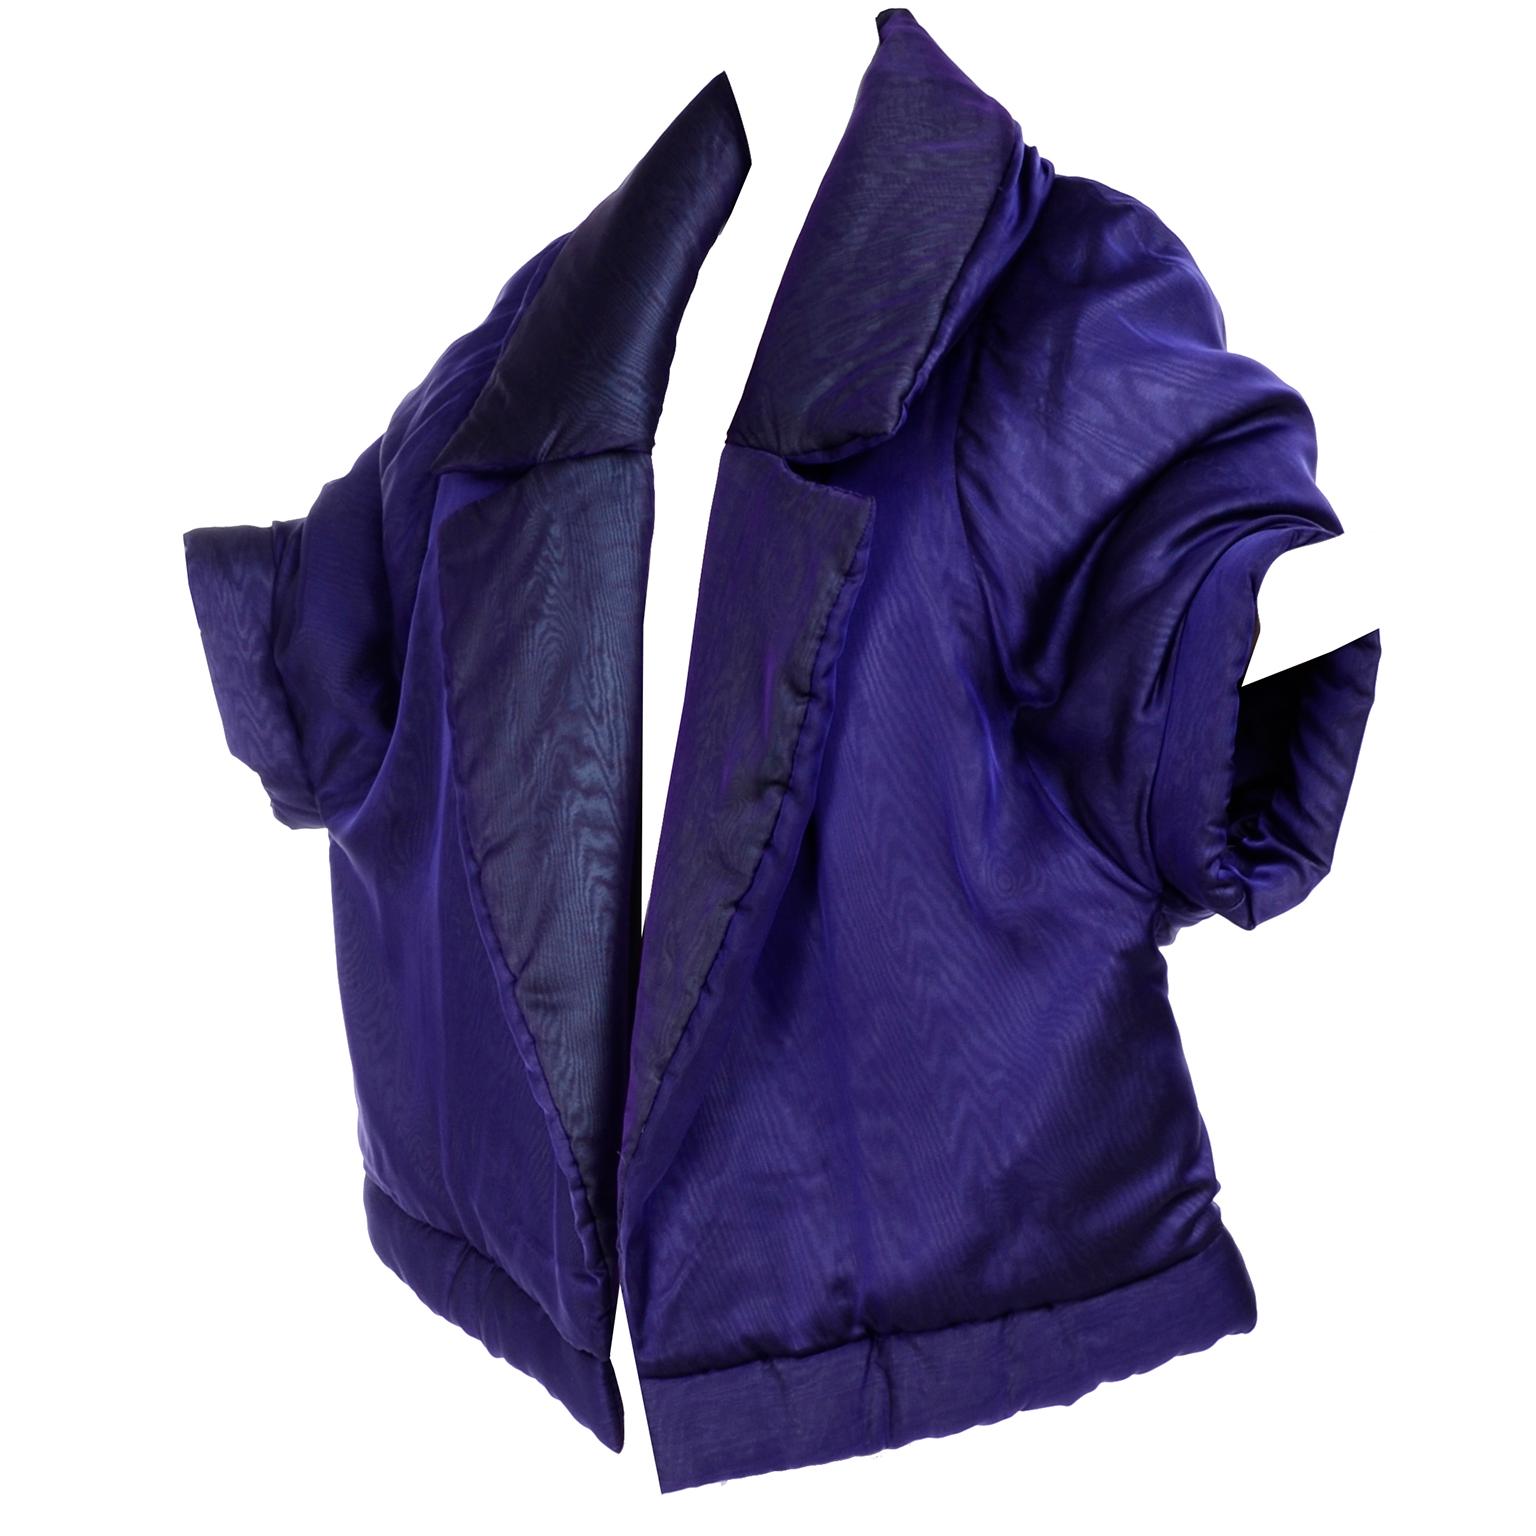 This absolutely sensational Gianfranco Ferre avant garde puffer style coat is in a deep, rich purple silk luxe fabric.  The coat is probably one of our favorite pieces with its exaggerated shawl collar and dramatic abstract kimono style statement